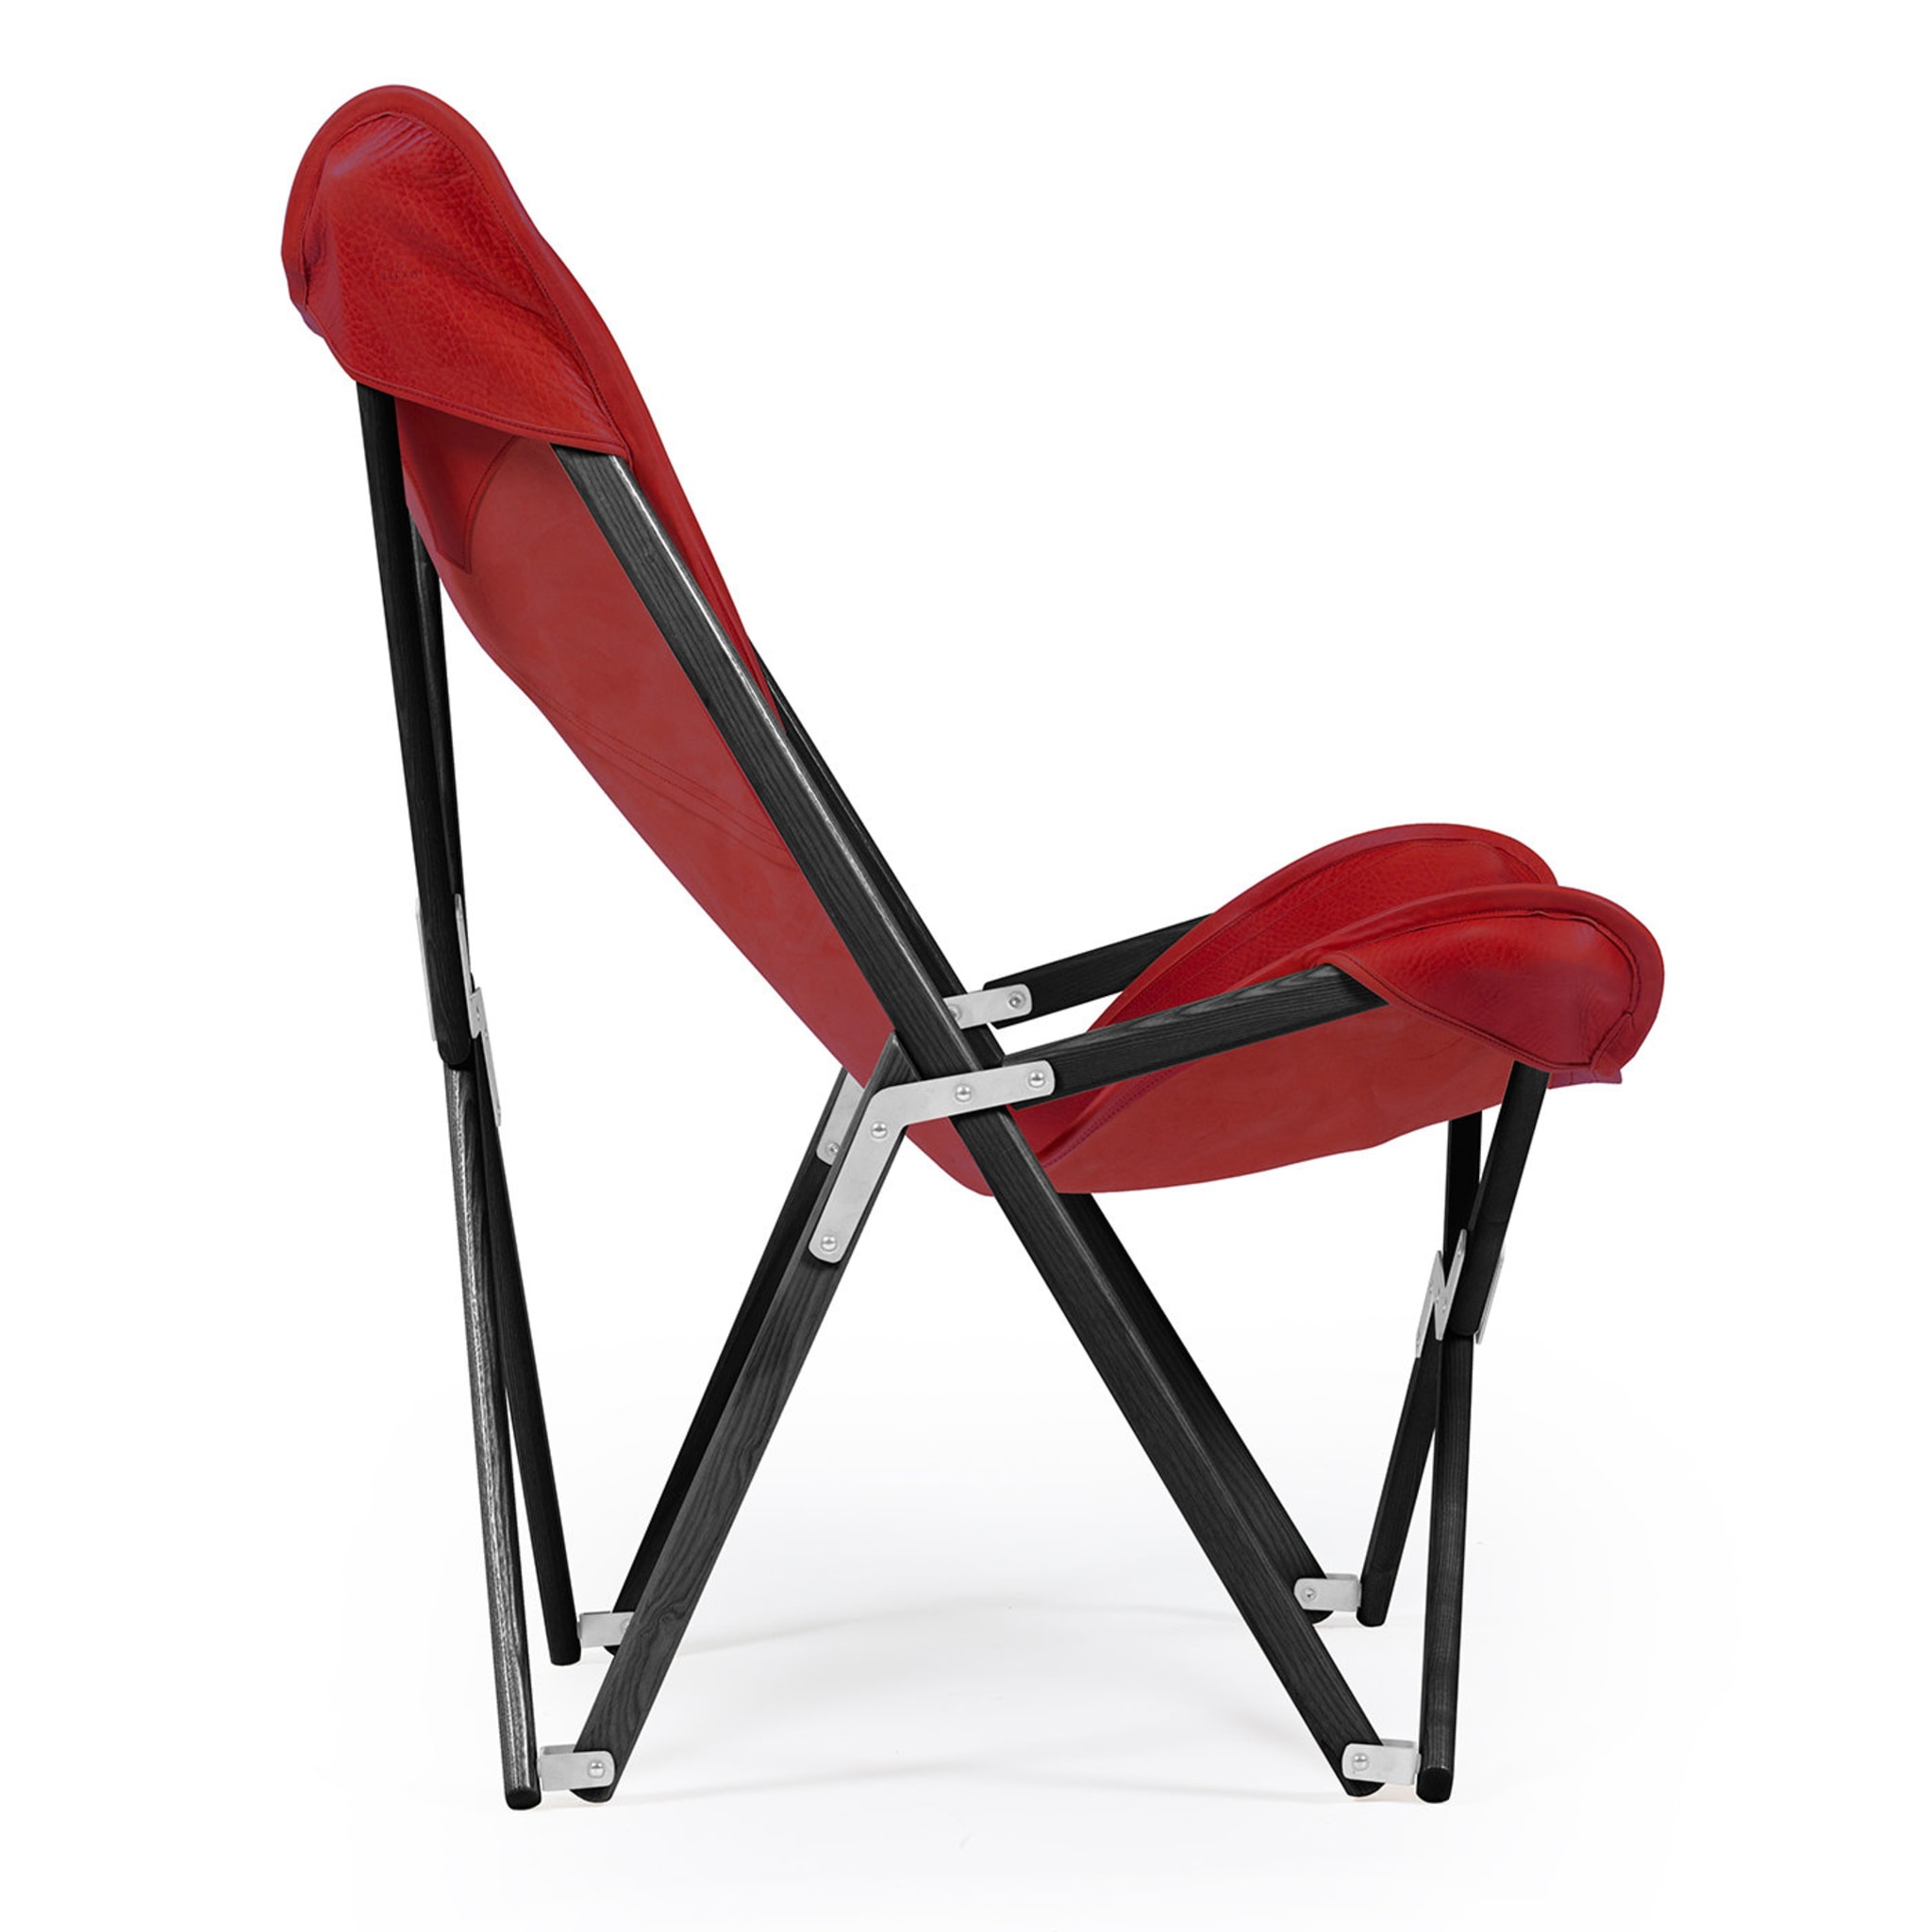 Tripolina Armchair in Red Leather - Alternative view 1